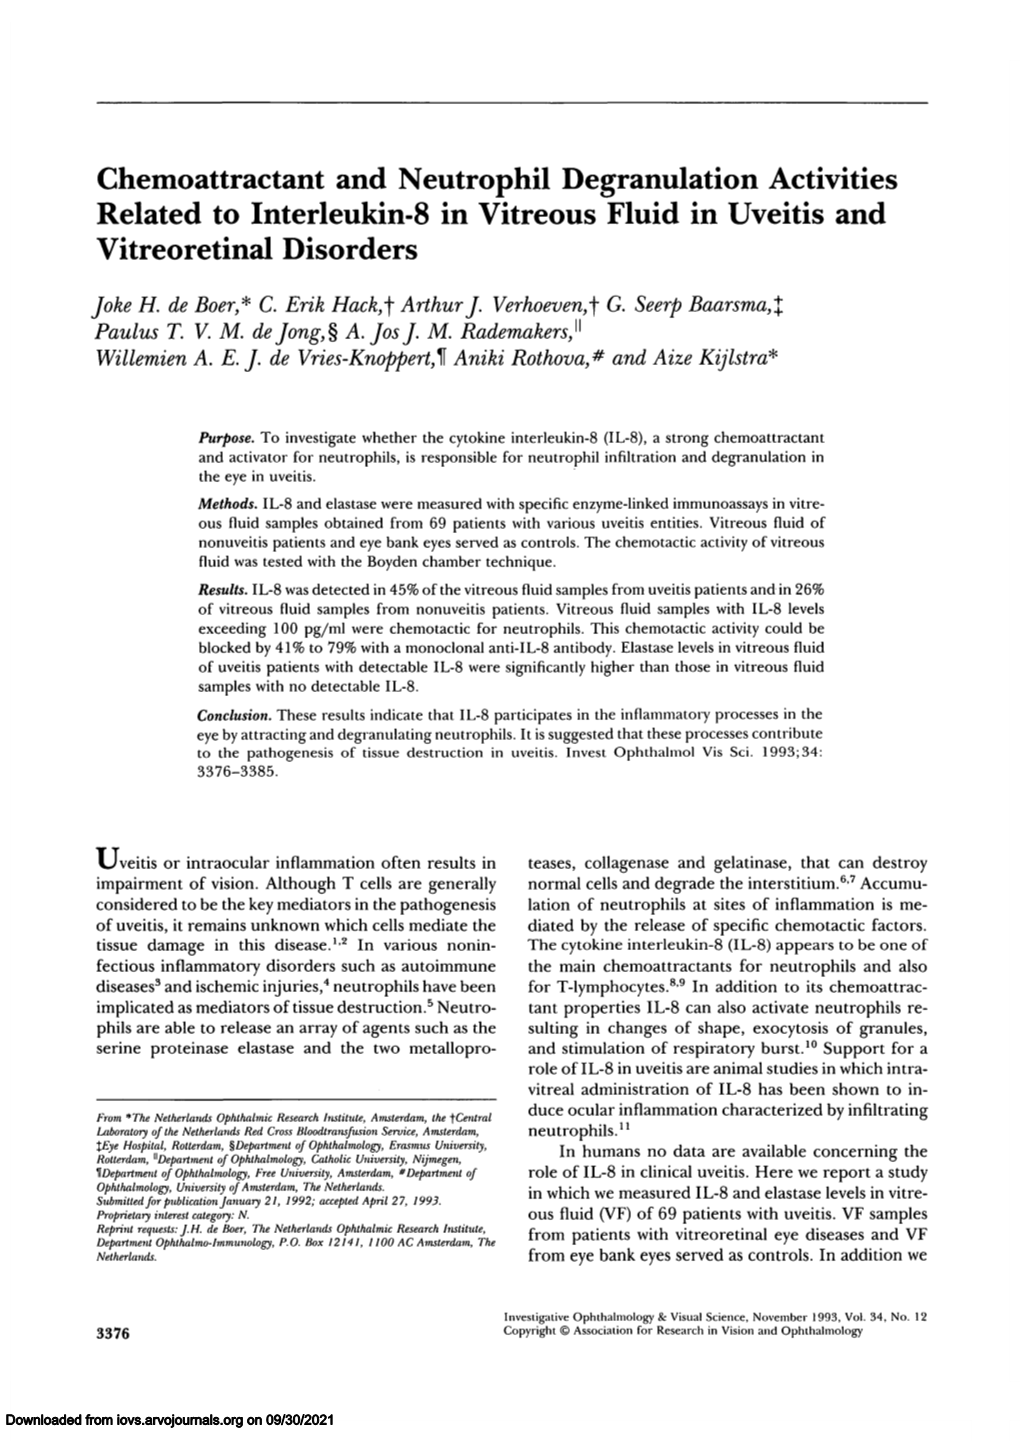 Chemoattractant and Neutrophil Degranulation Activities Related to Interleukin-8 in Vitreous Fluid in Uveitis and Vitreoretinal Disorders